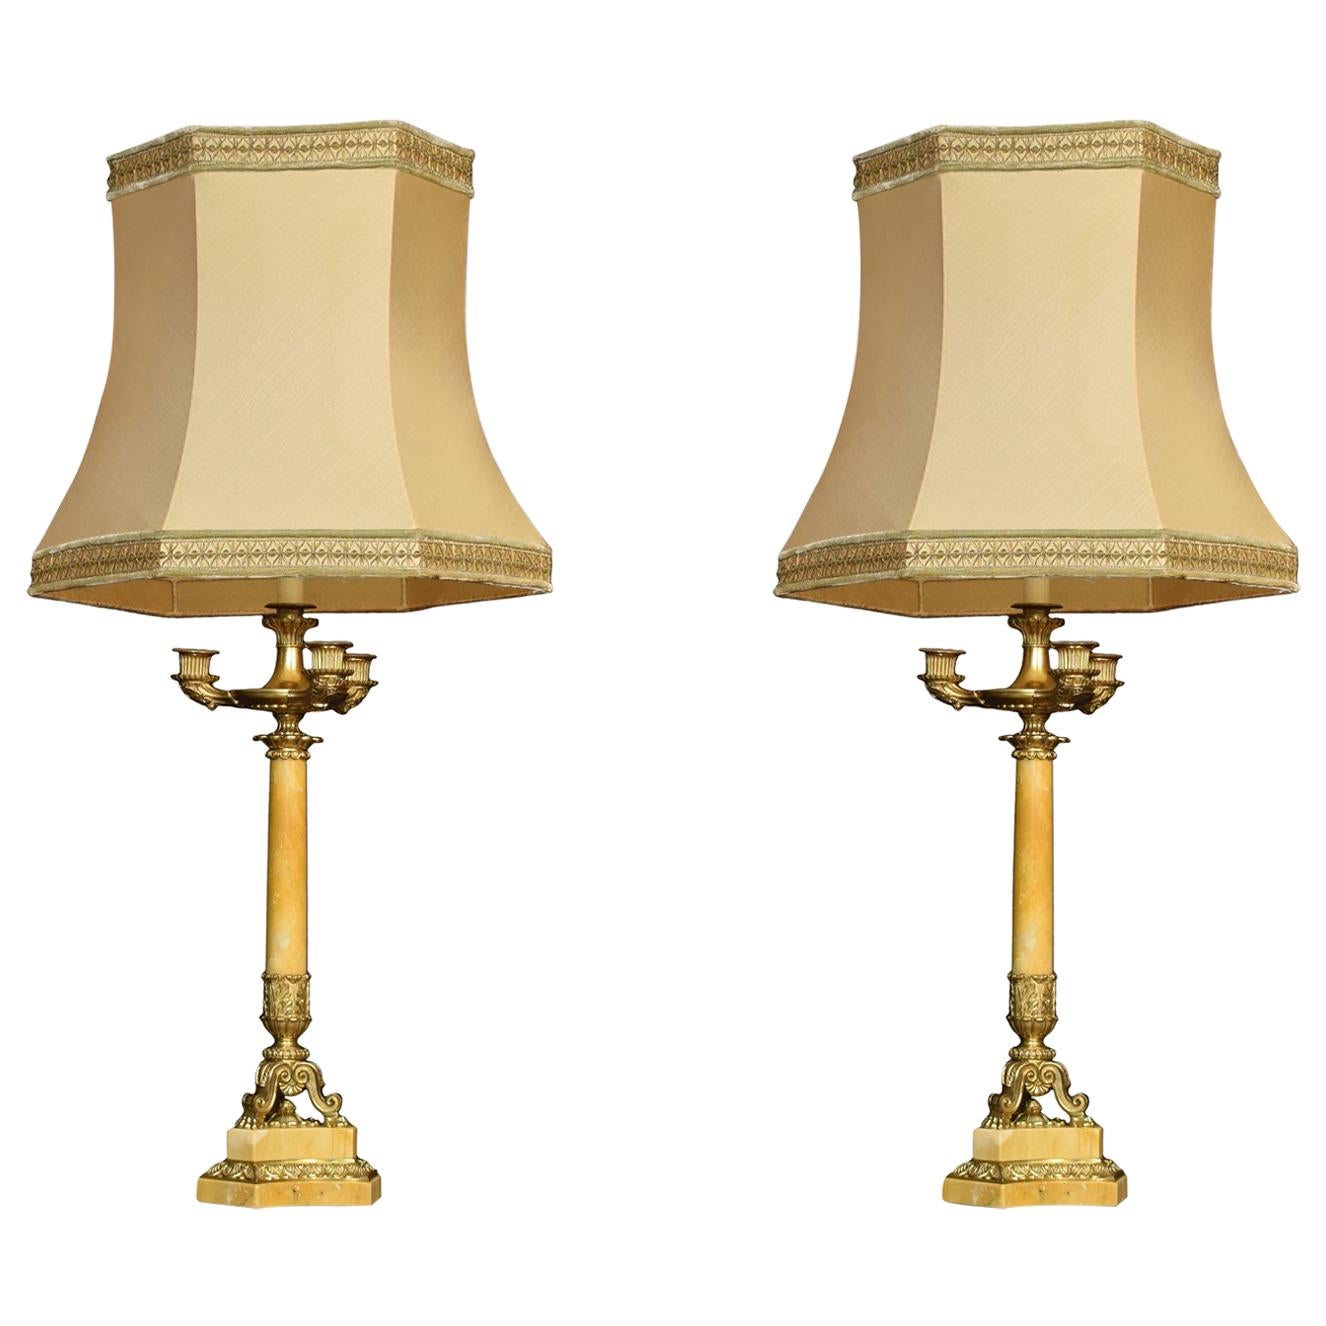 Pair of Gilt Metal and Sienna Marble Table Lamps